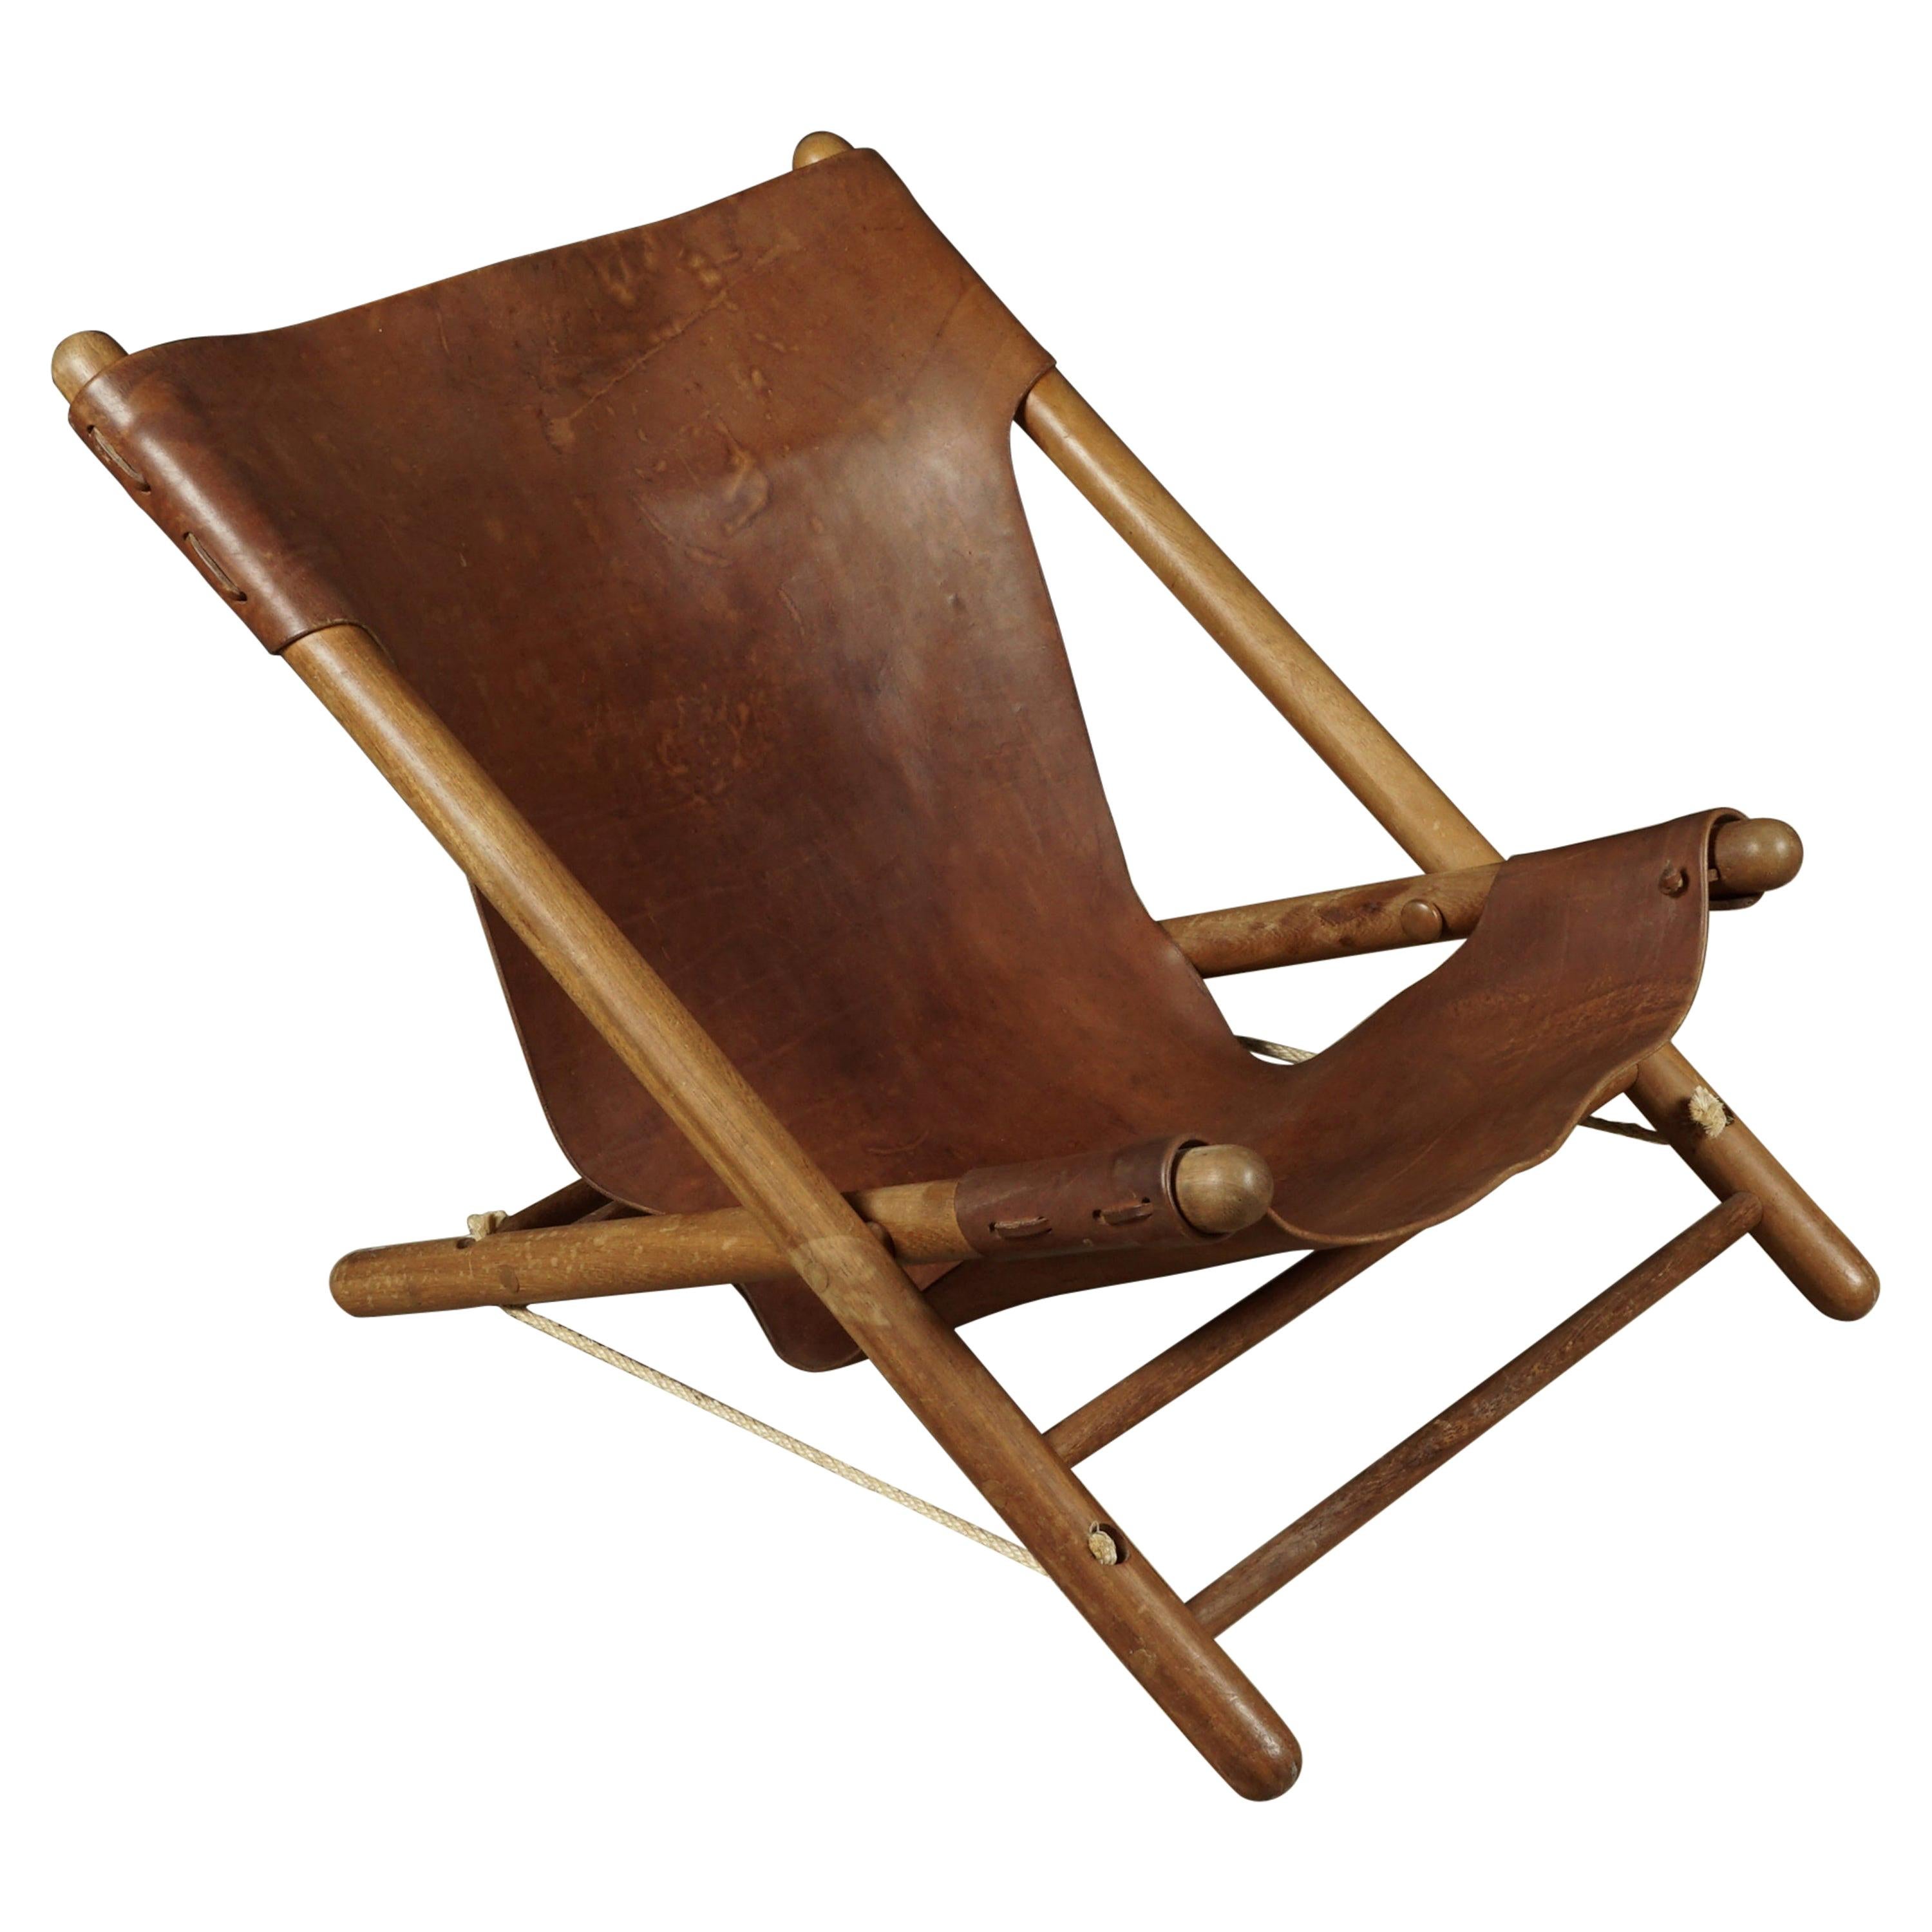 Vintage Leather Lounge Chair from France, circa 1970